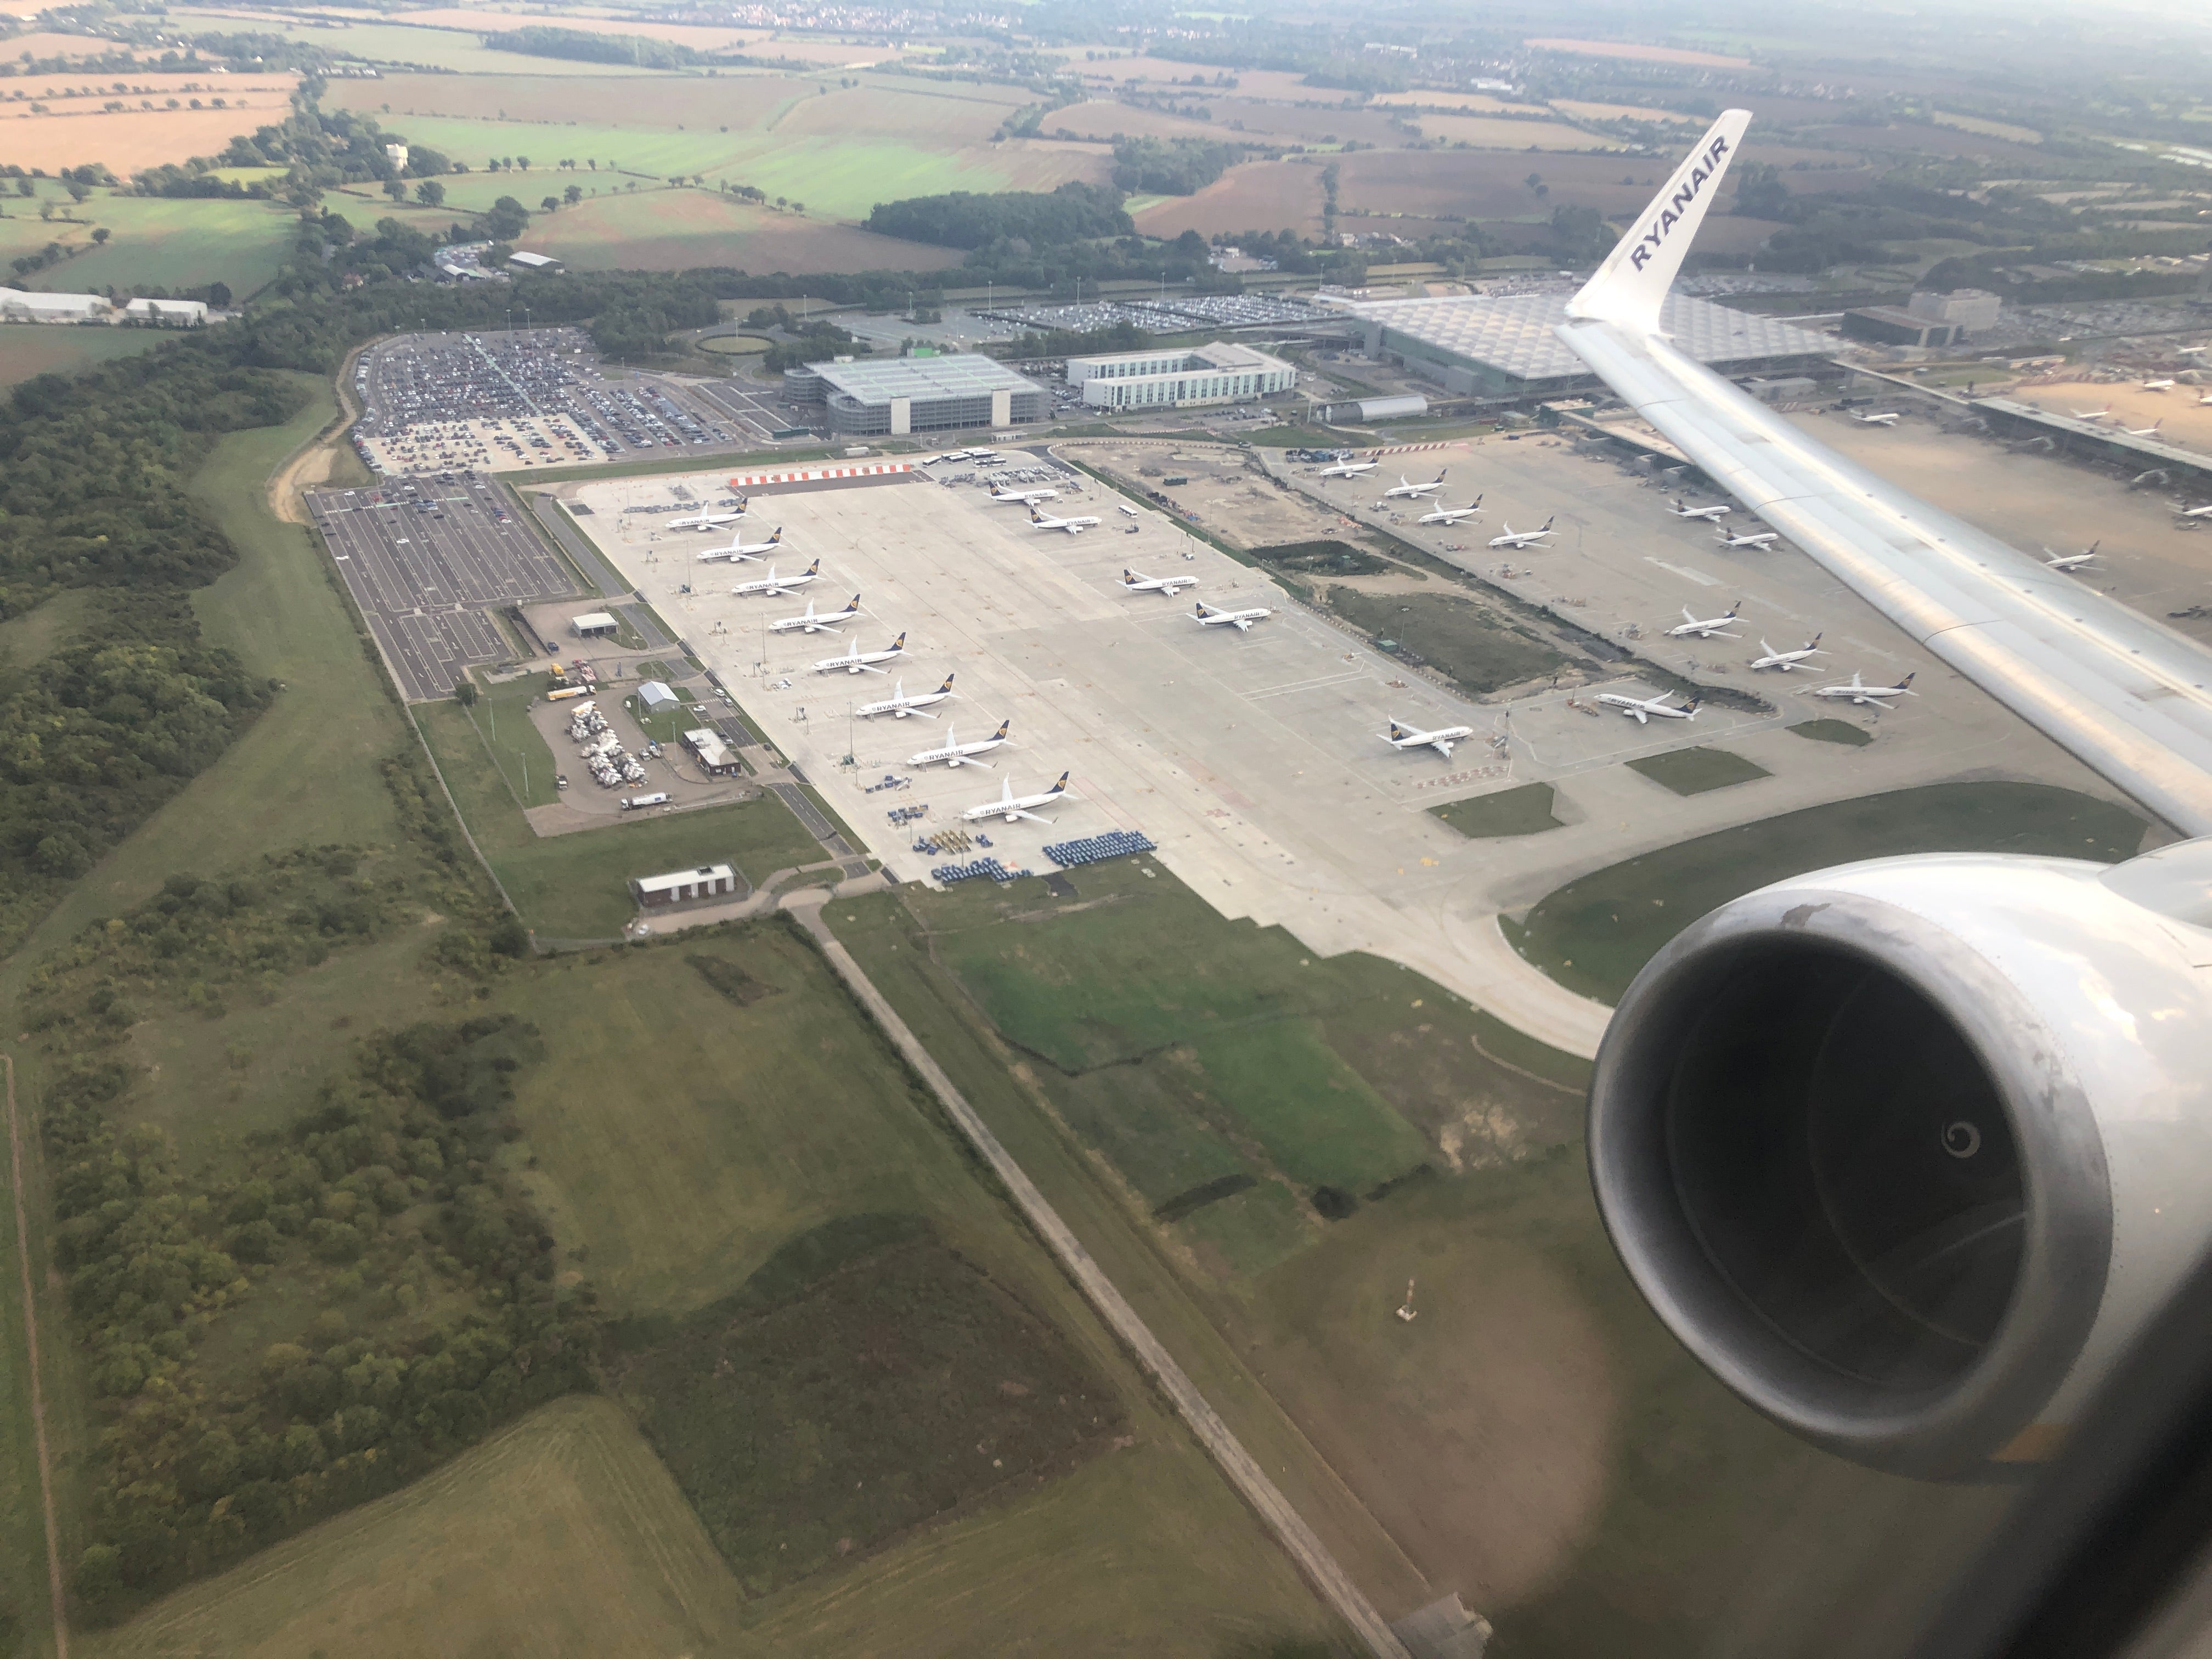 Ground stop: a Ryanair Boeing 737 flies past lines of parked aircraft at Stansted airport